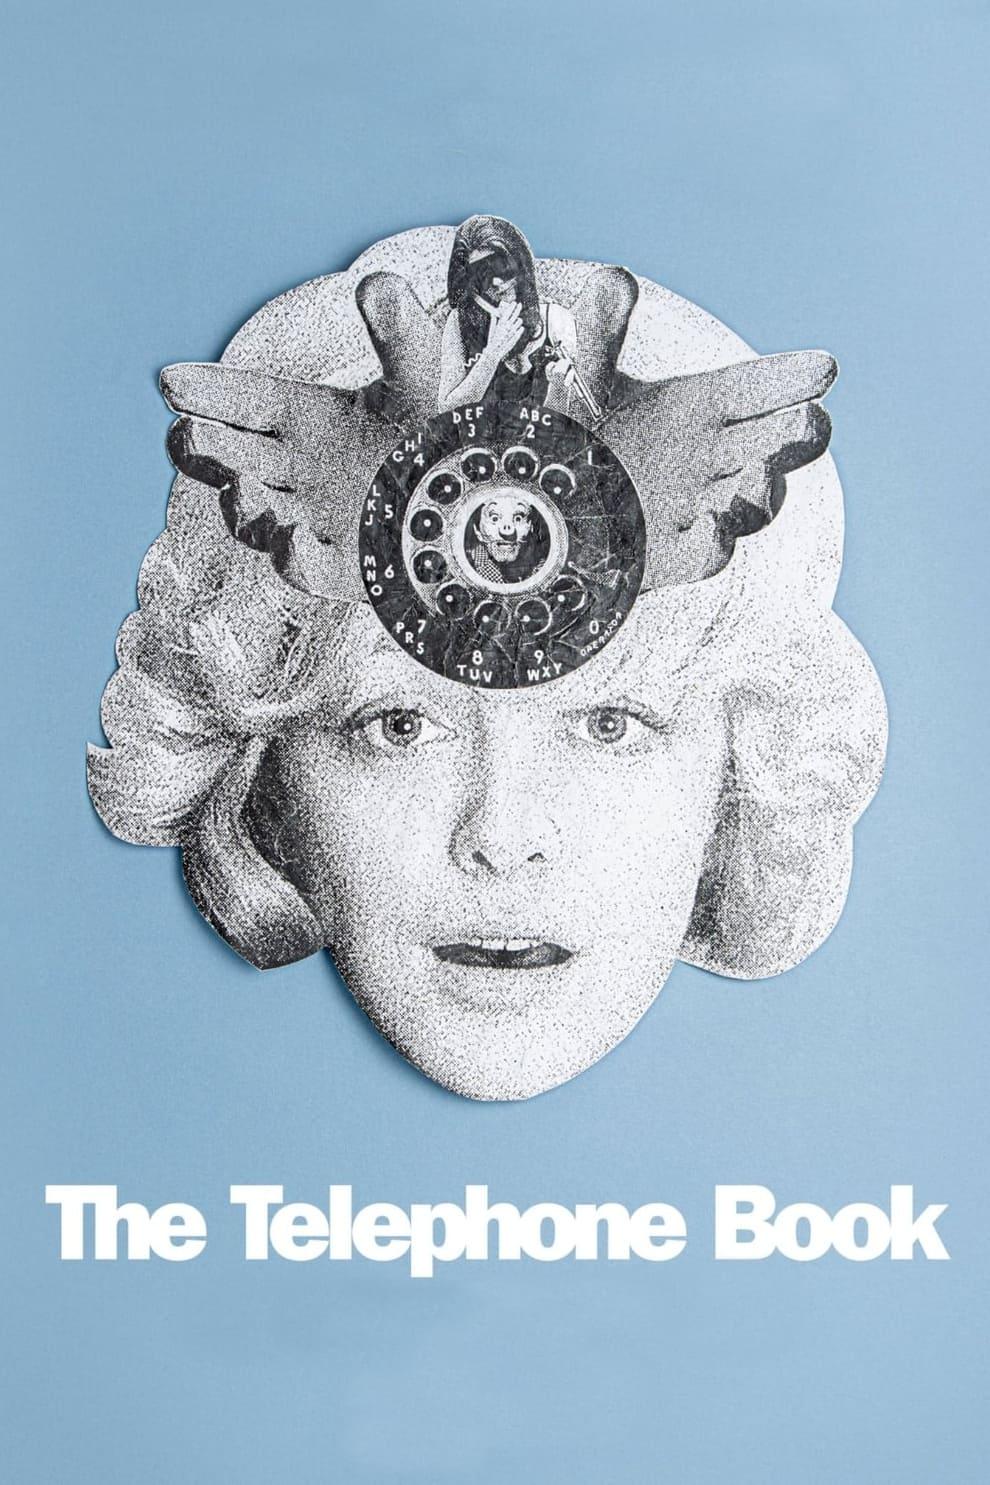 The Telephone Book poster